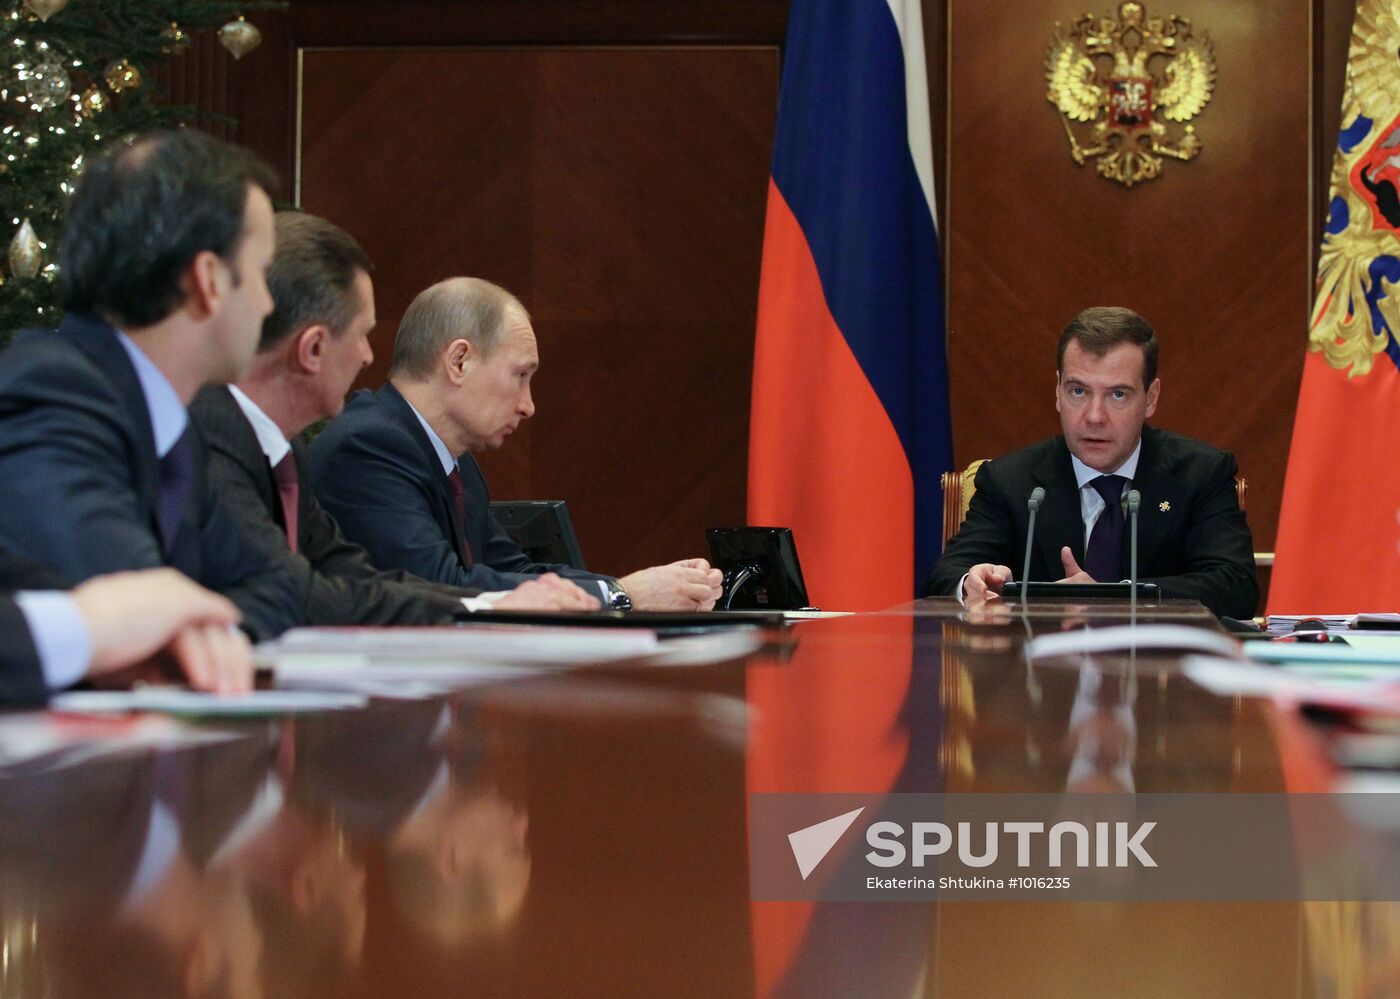 Dmitry Medvedev chairs meeting on economic issues